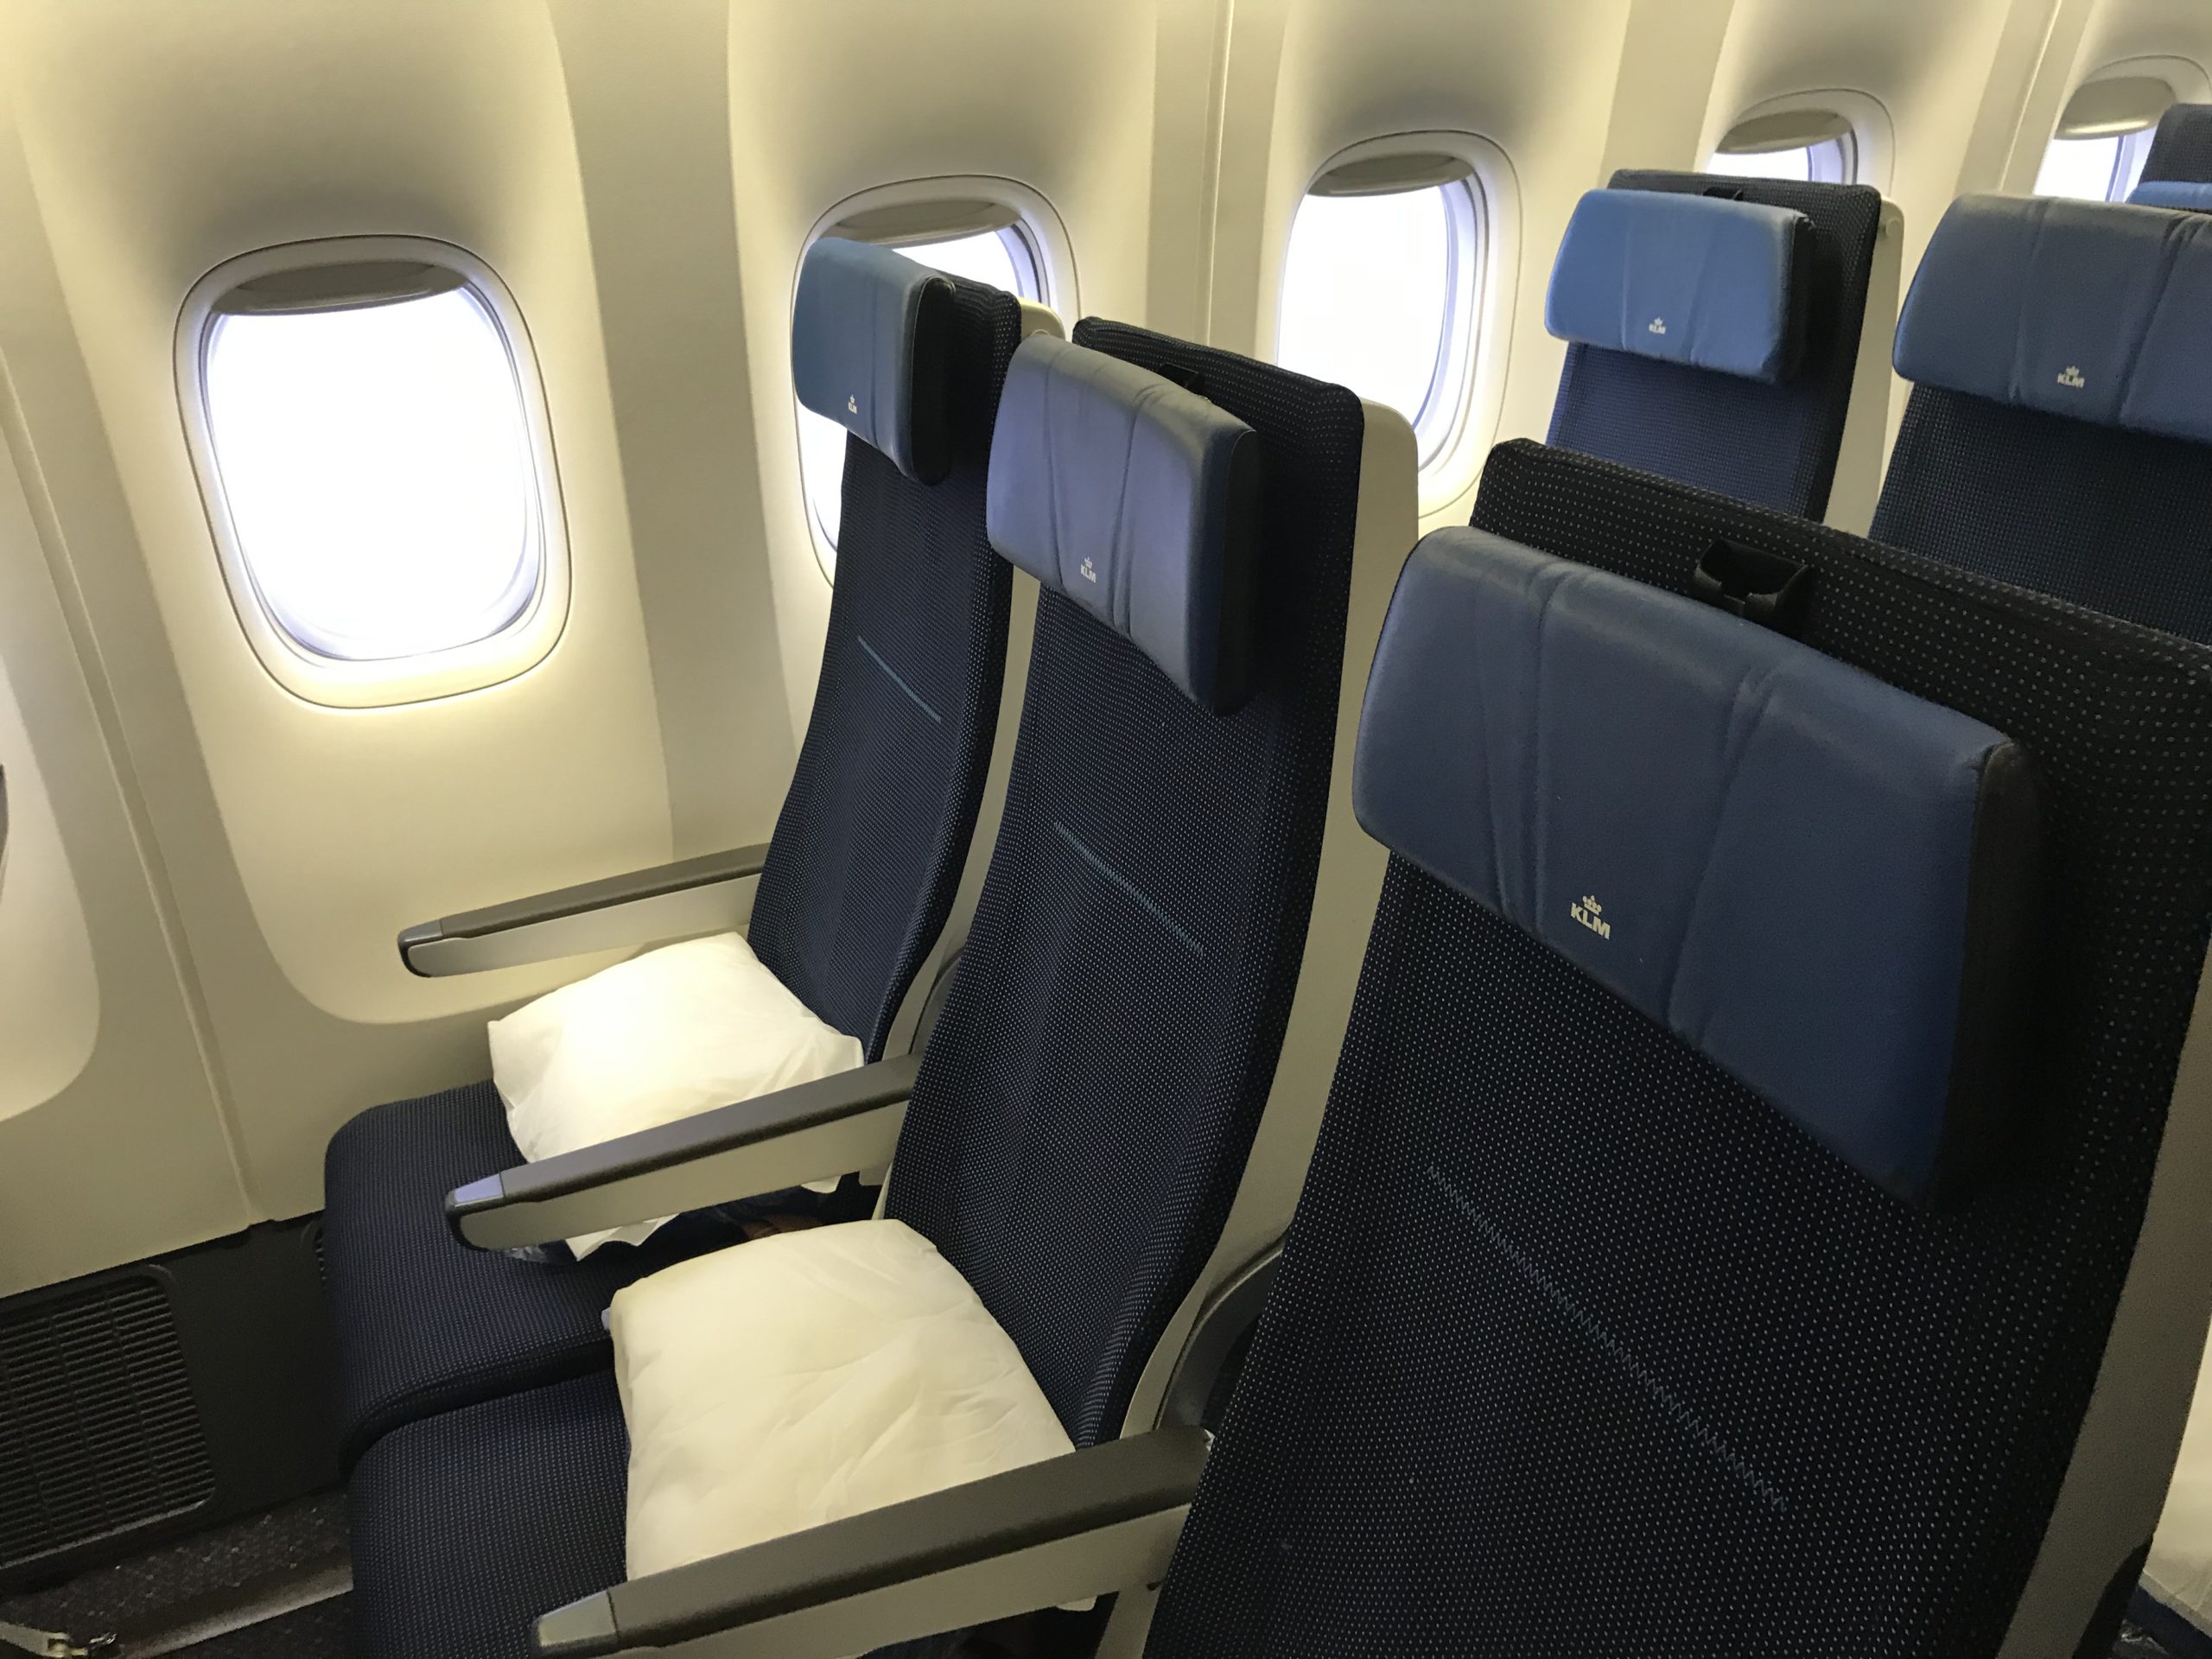 Review: KLM 777-200ER Economy Class With Kids - AMS to SFO